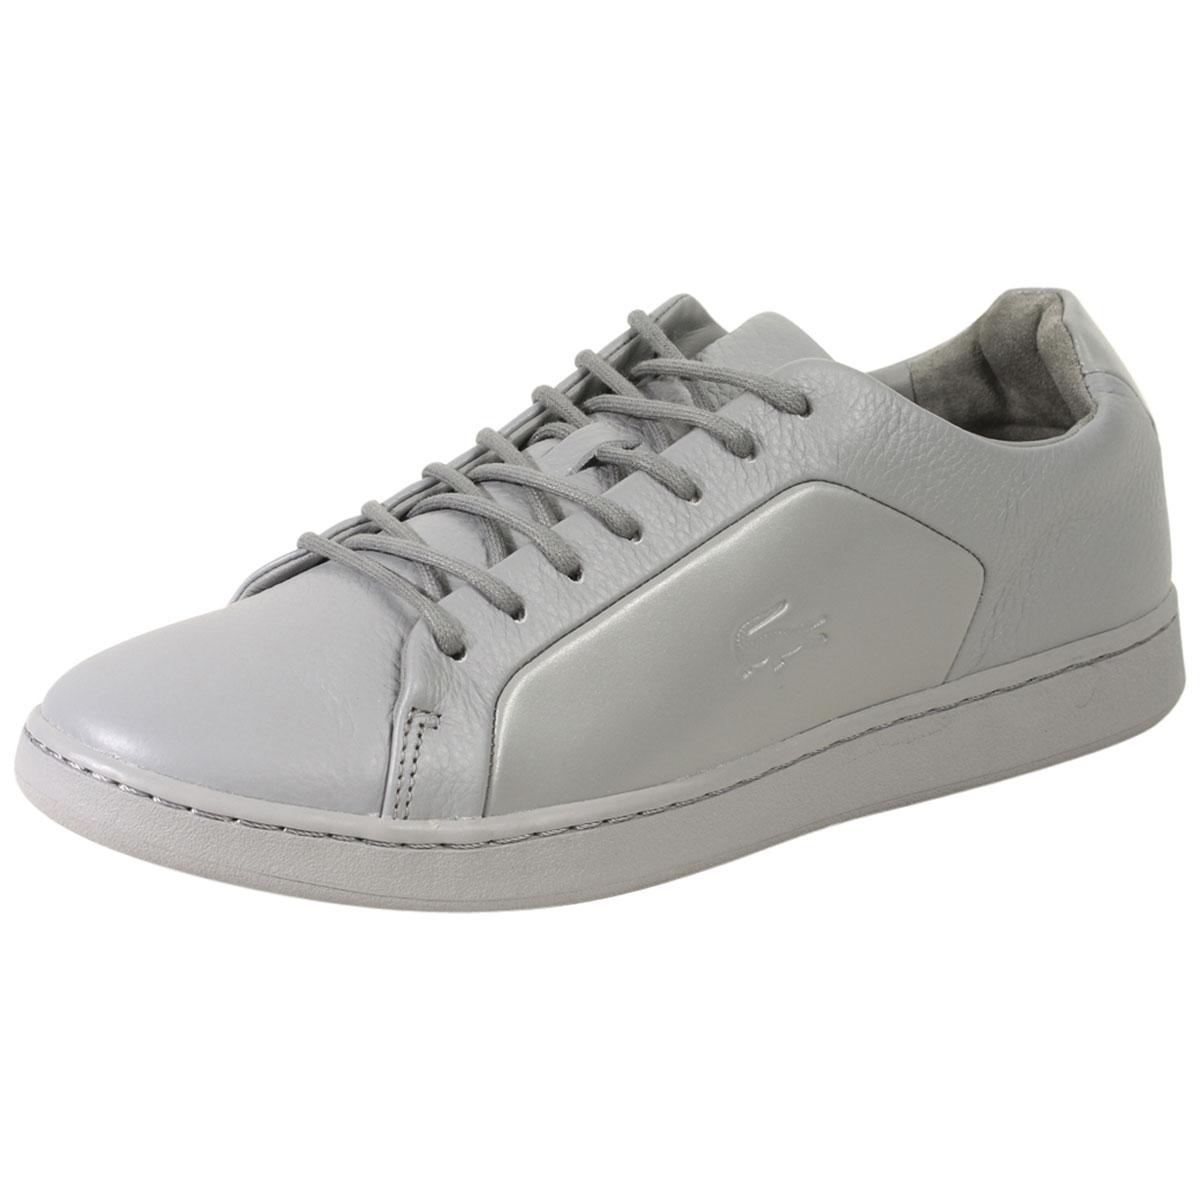 men's carnaby evo leather sneakers